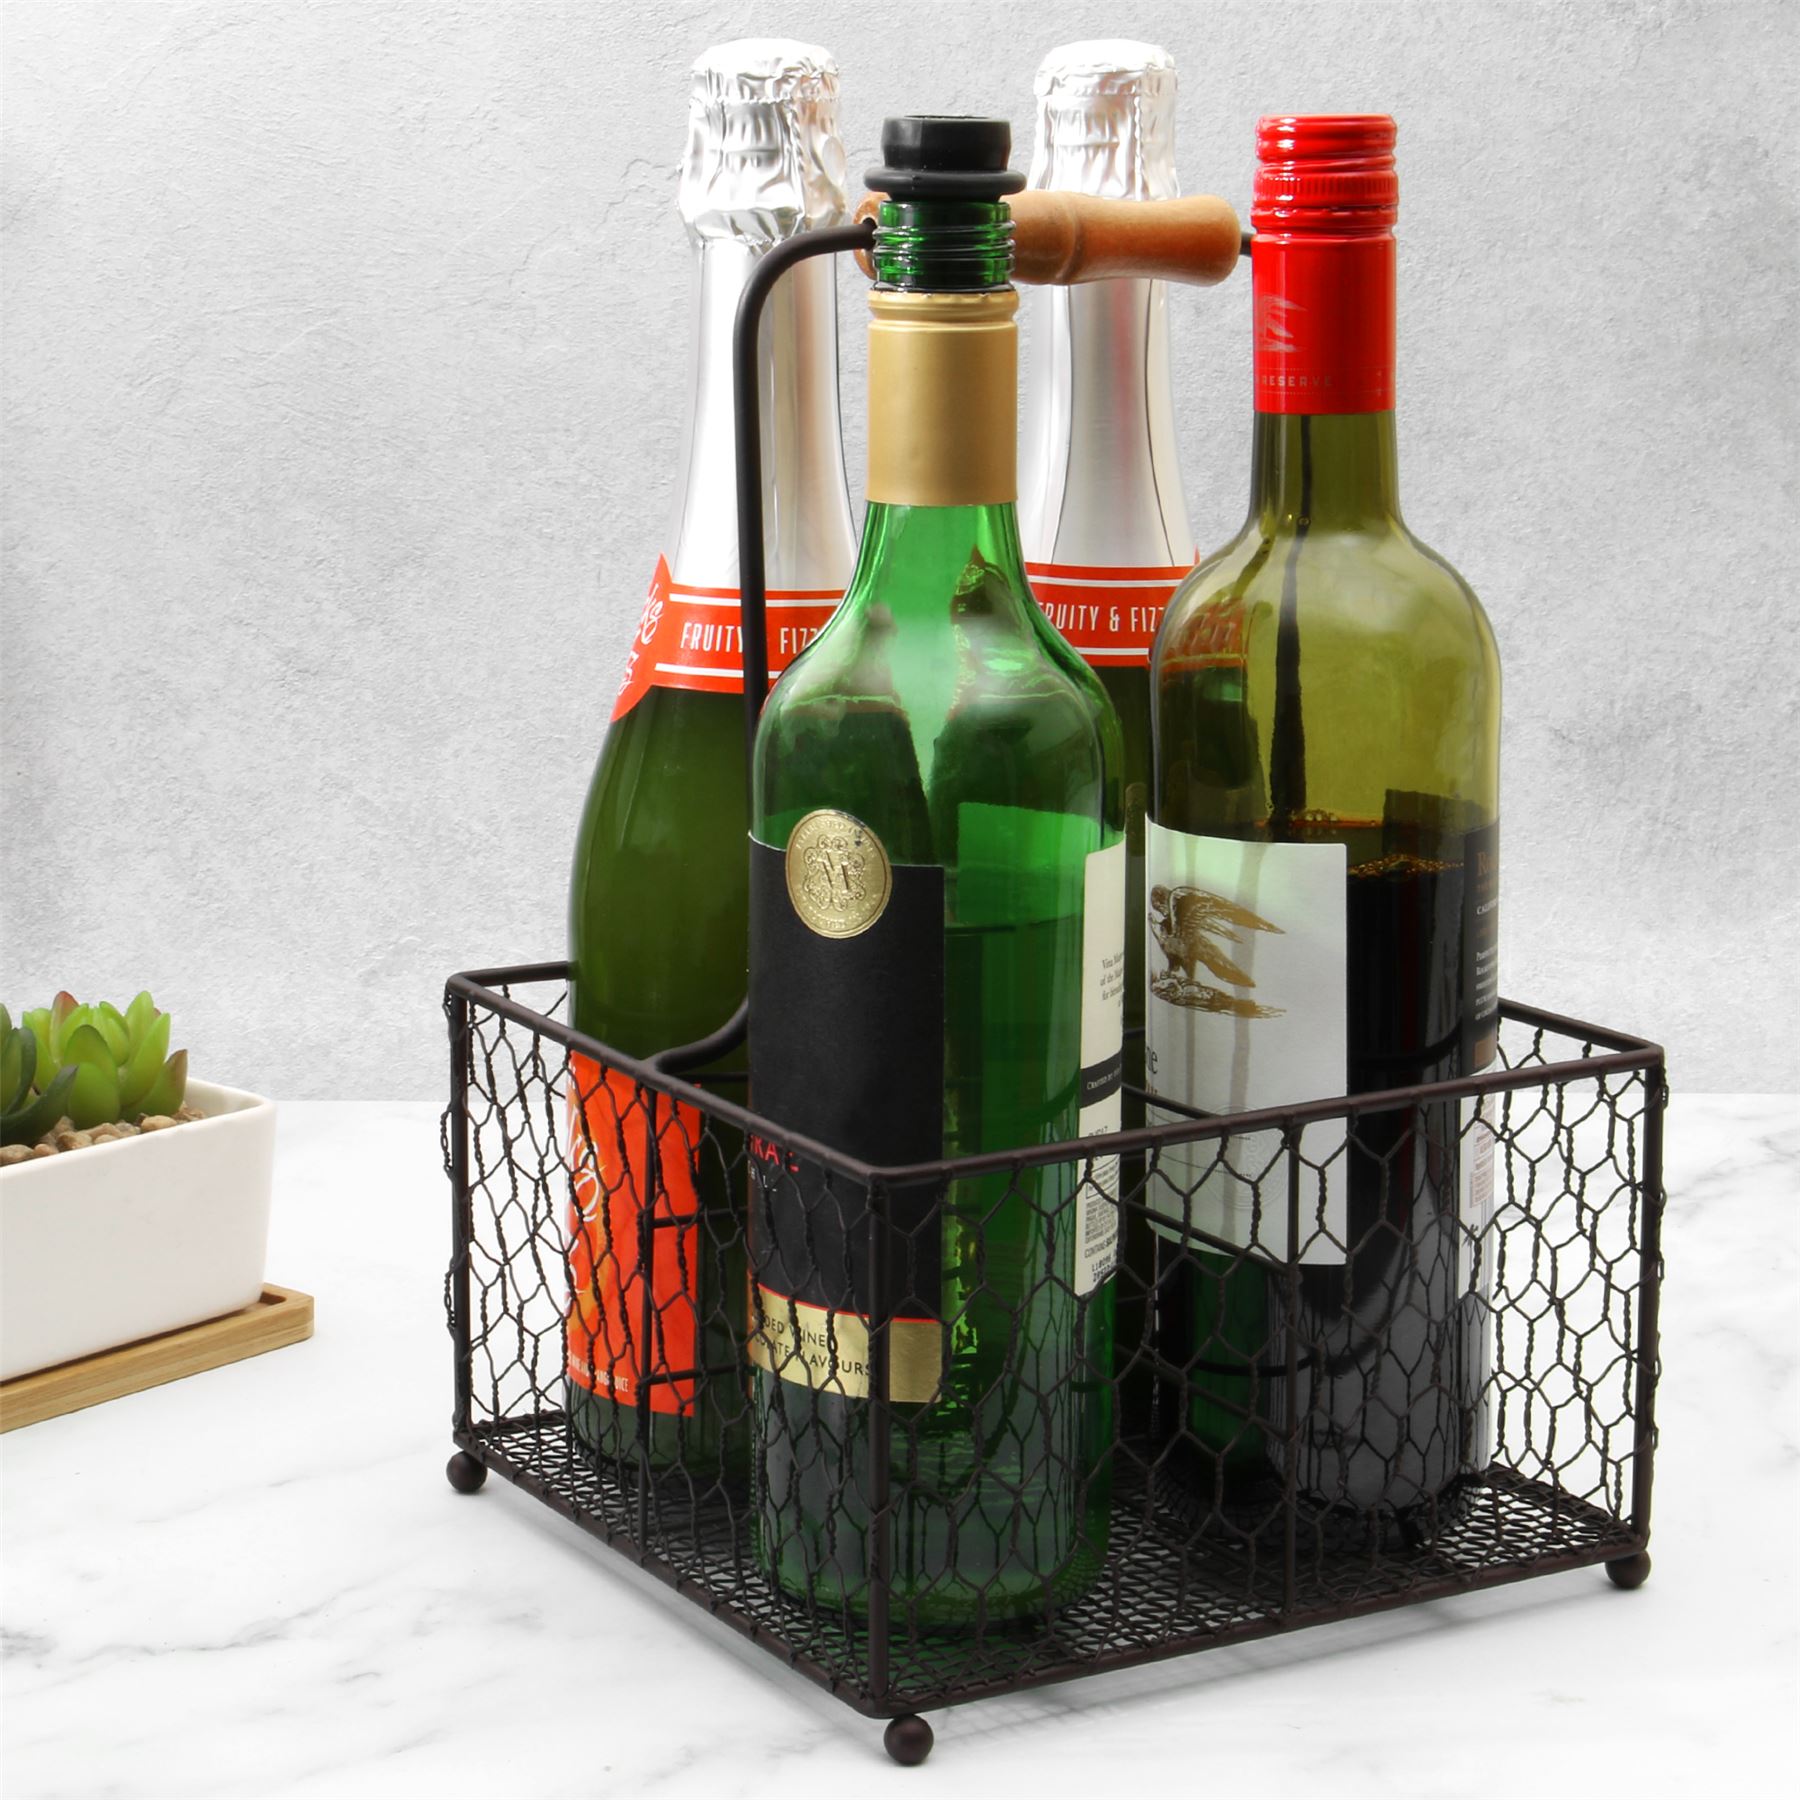 4 Bottle Holder with Wooden Handle | M&W